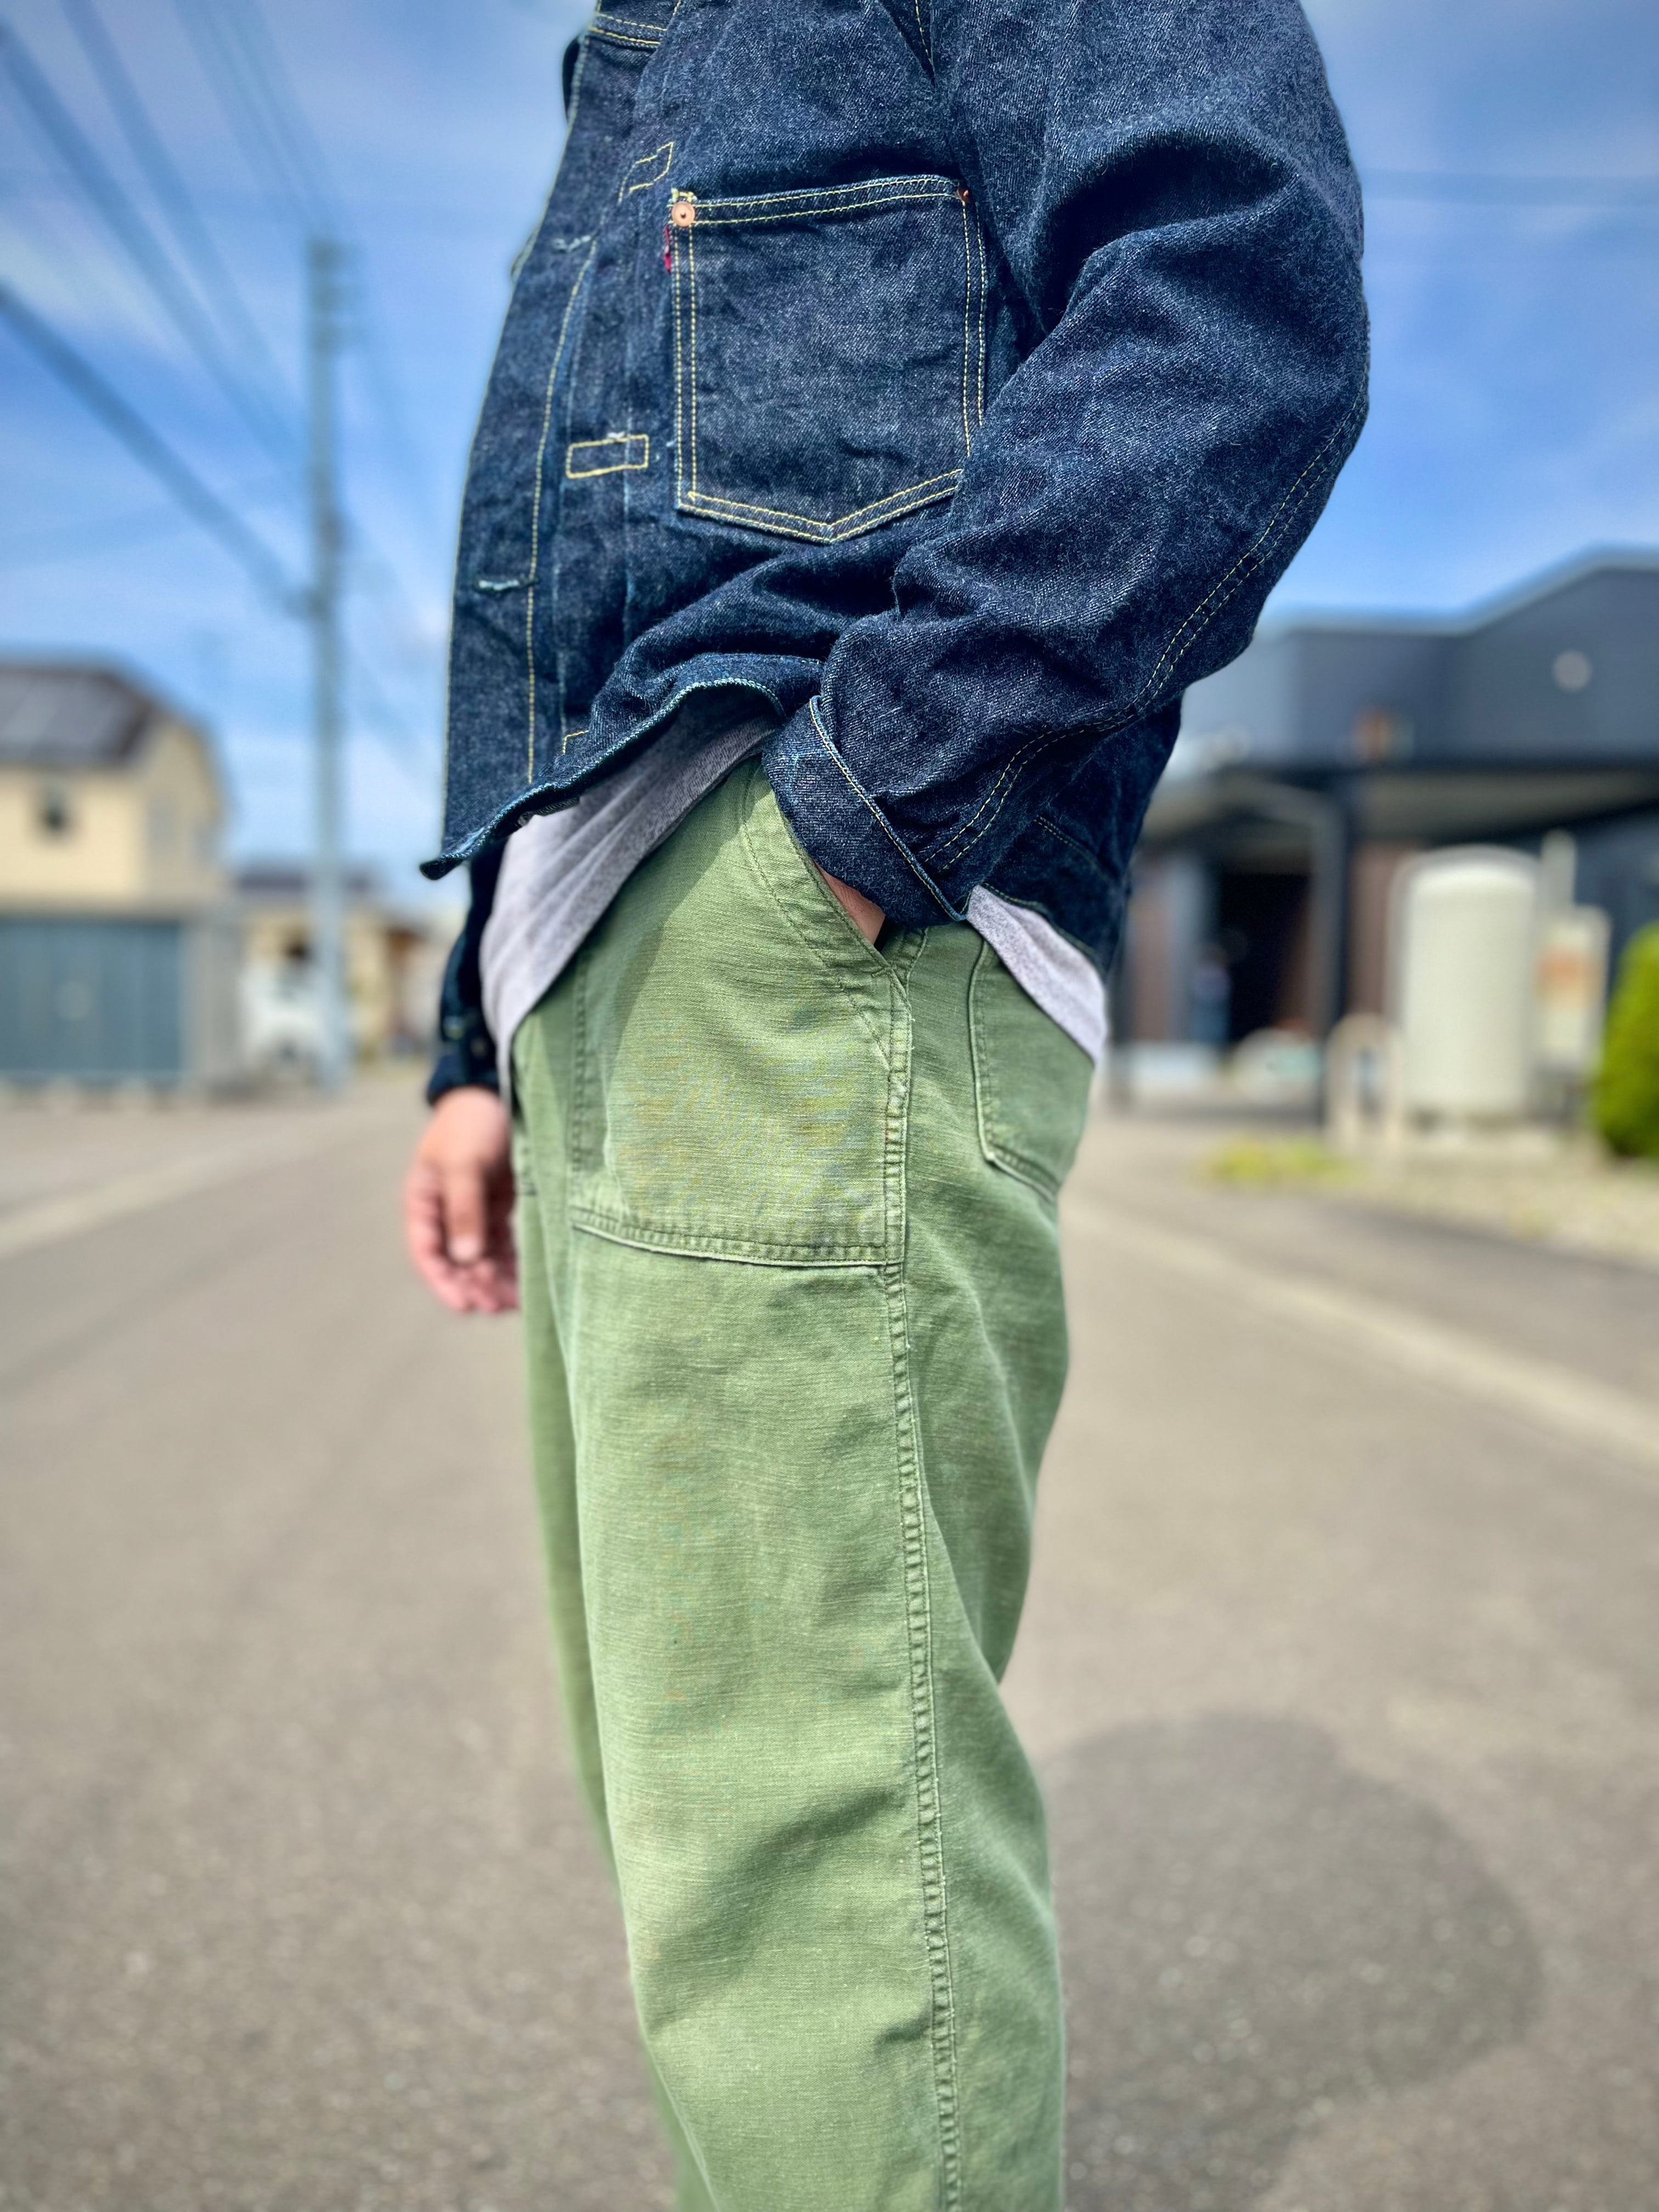 34×31】U.S.Army Utility Trousers OG-107 Used 実物 米軍 ベイカー 